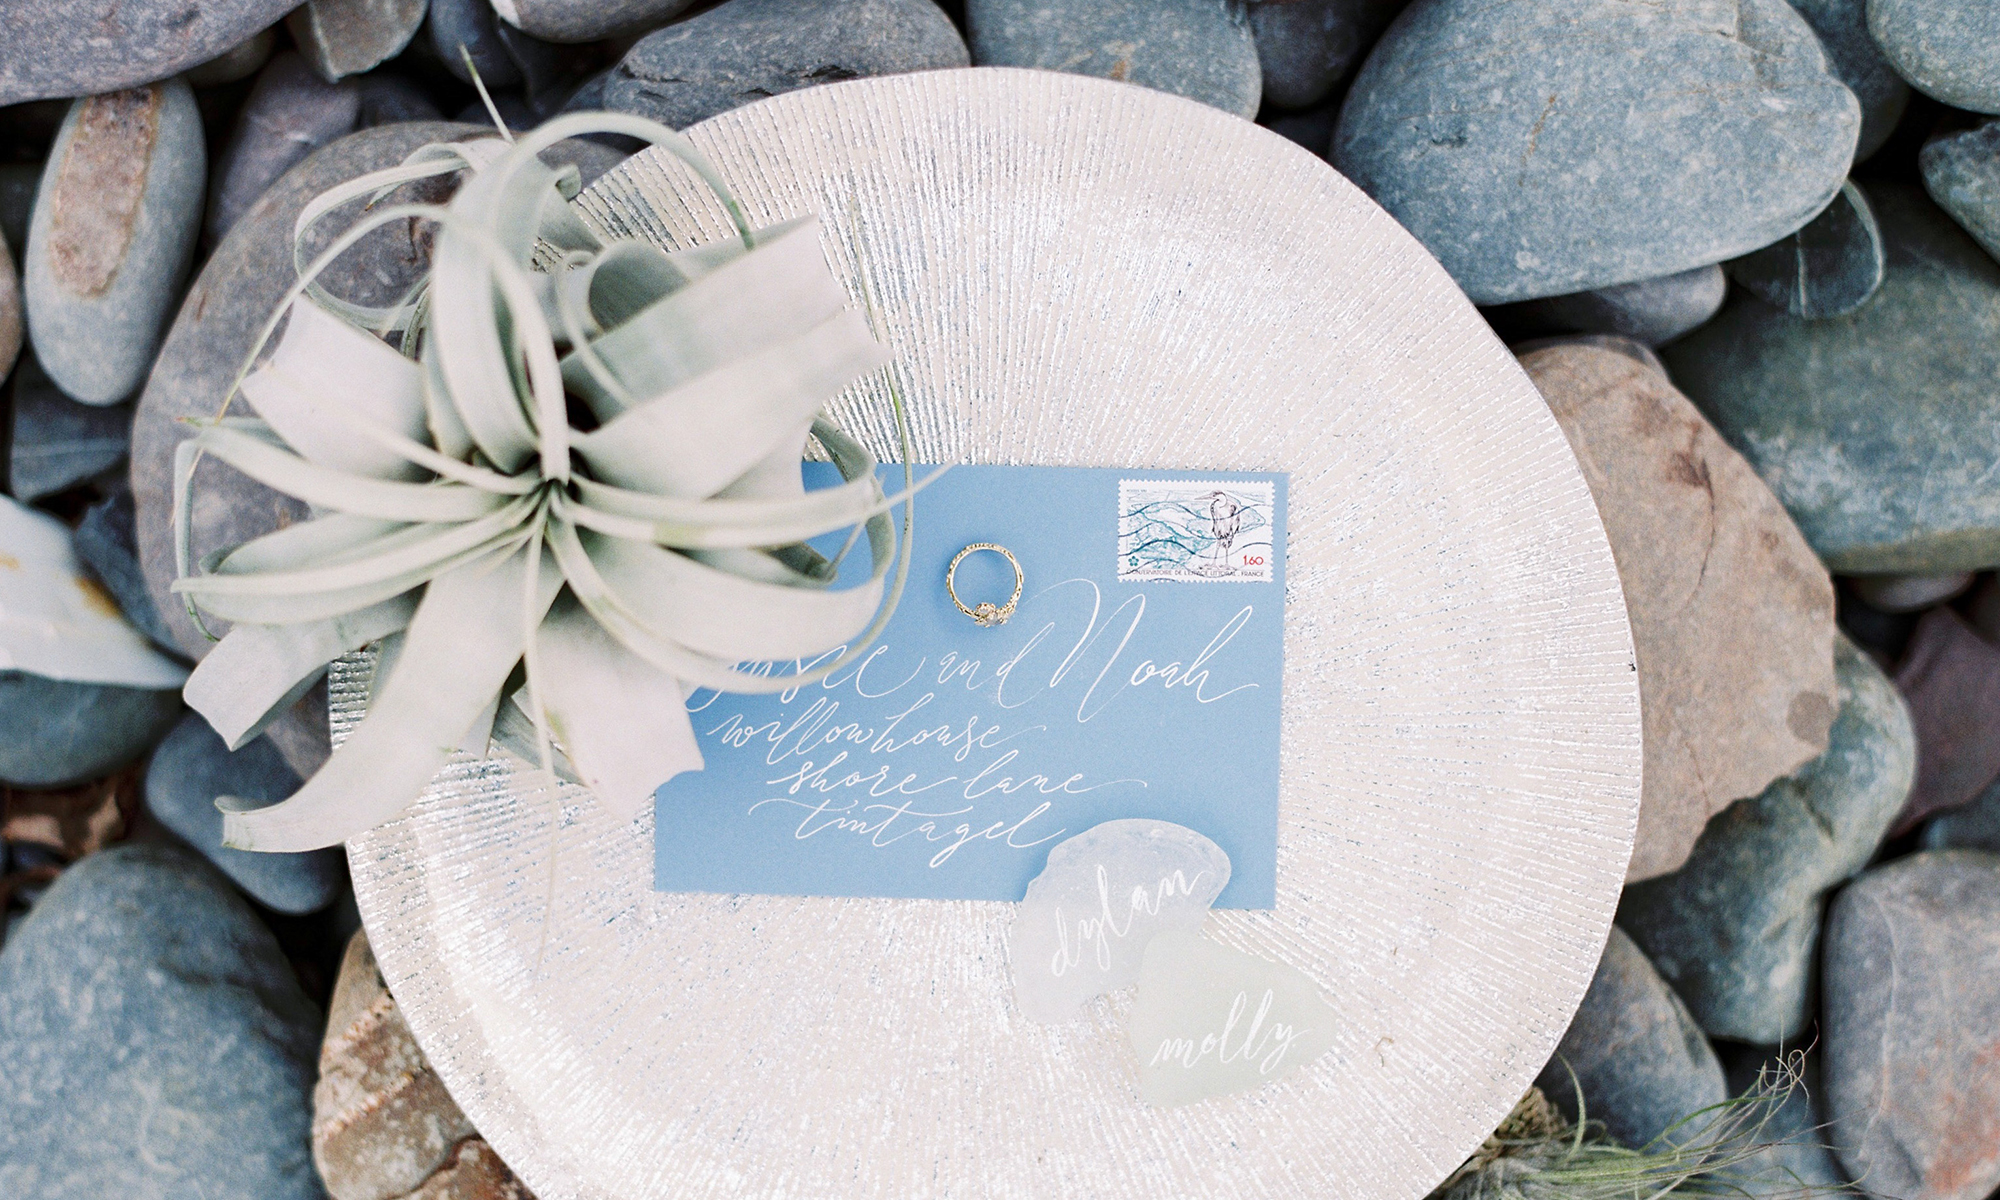 A pale blue envelope with calligraphy addressing on a silver plate with a succulent and sea glass, and a wedding ring. The plate is on pebbles, like on a beach